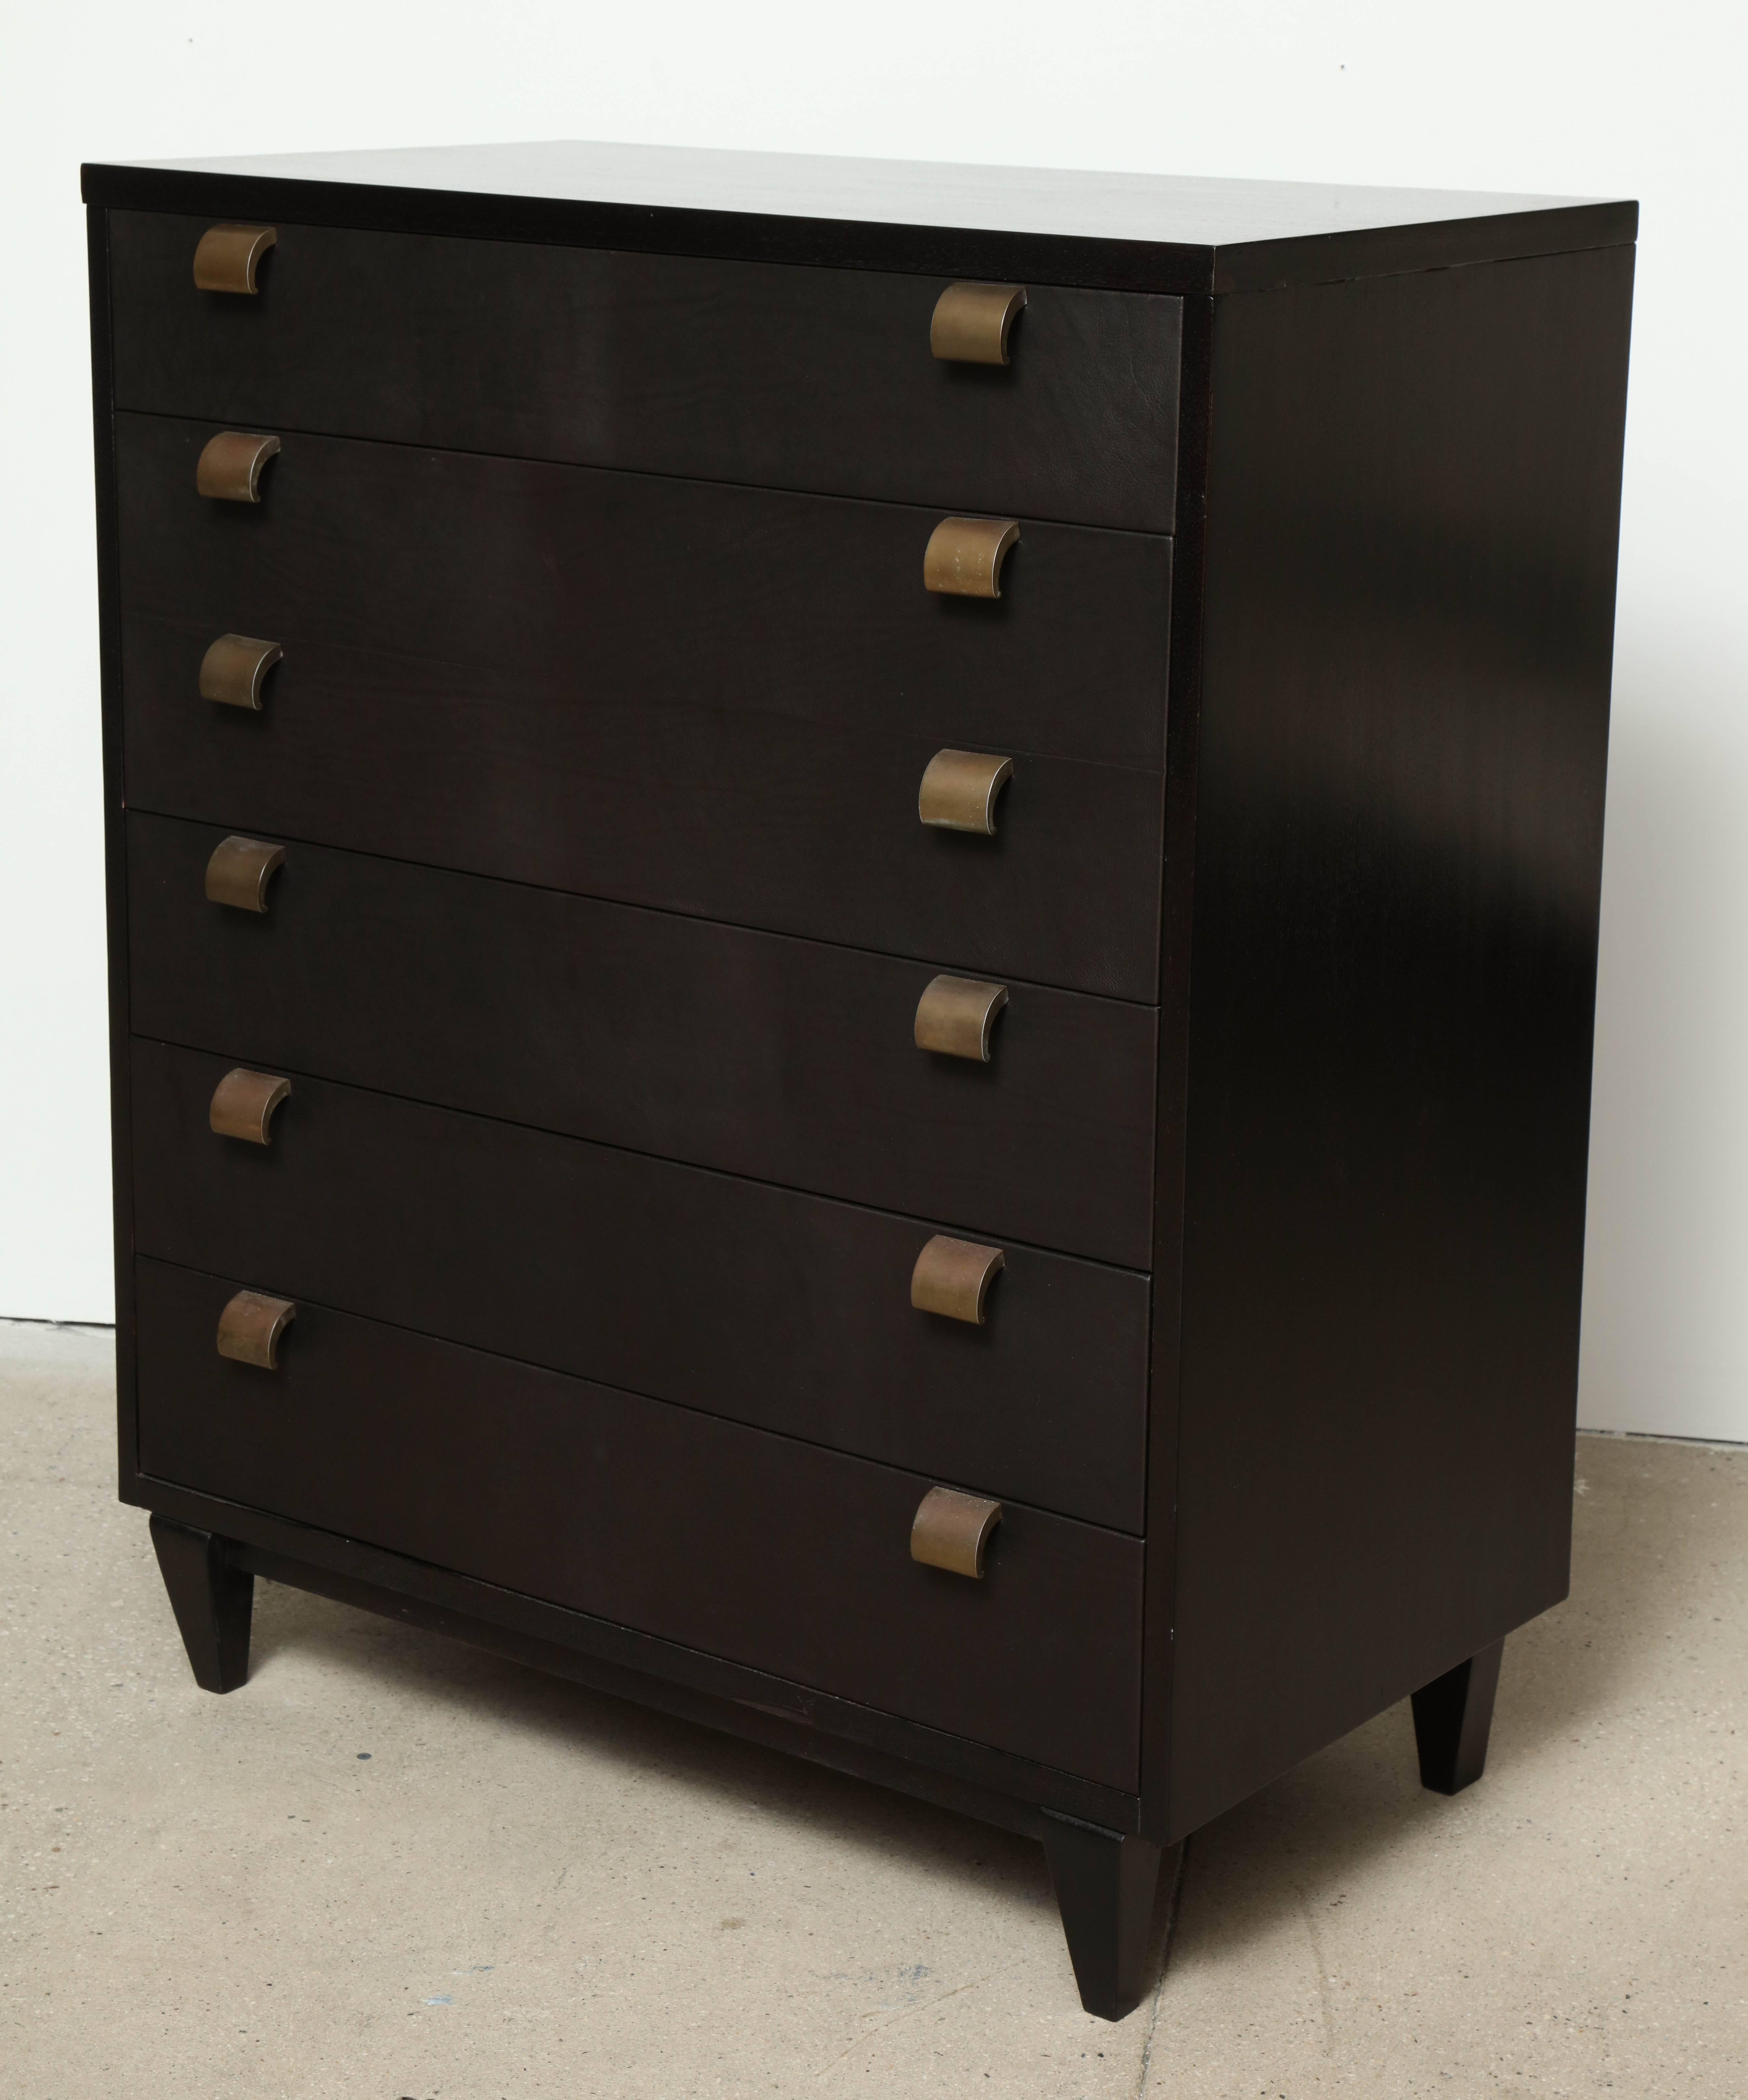 Tall chest of drawers by American of Martinsville, sable finished with leather clad drawer fronts, circa 1950.